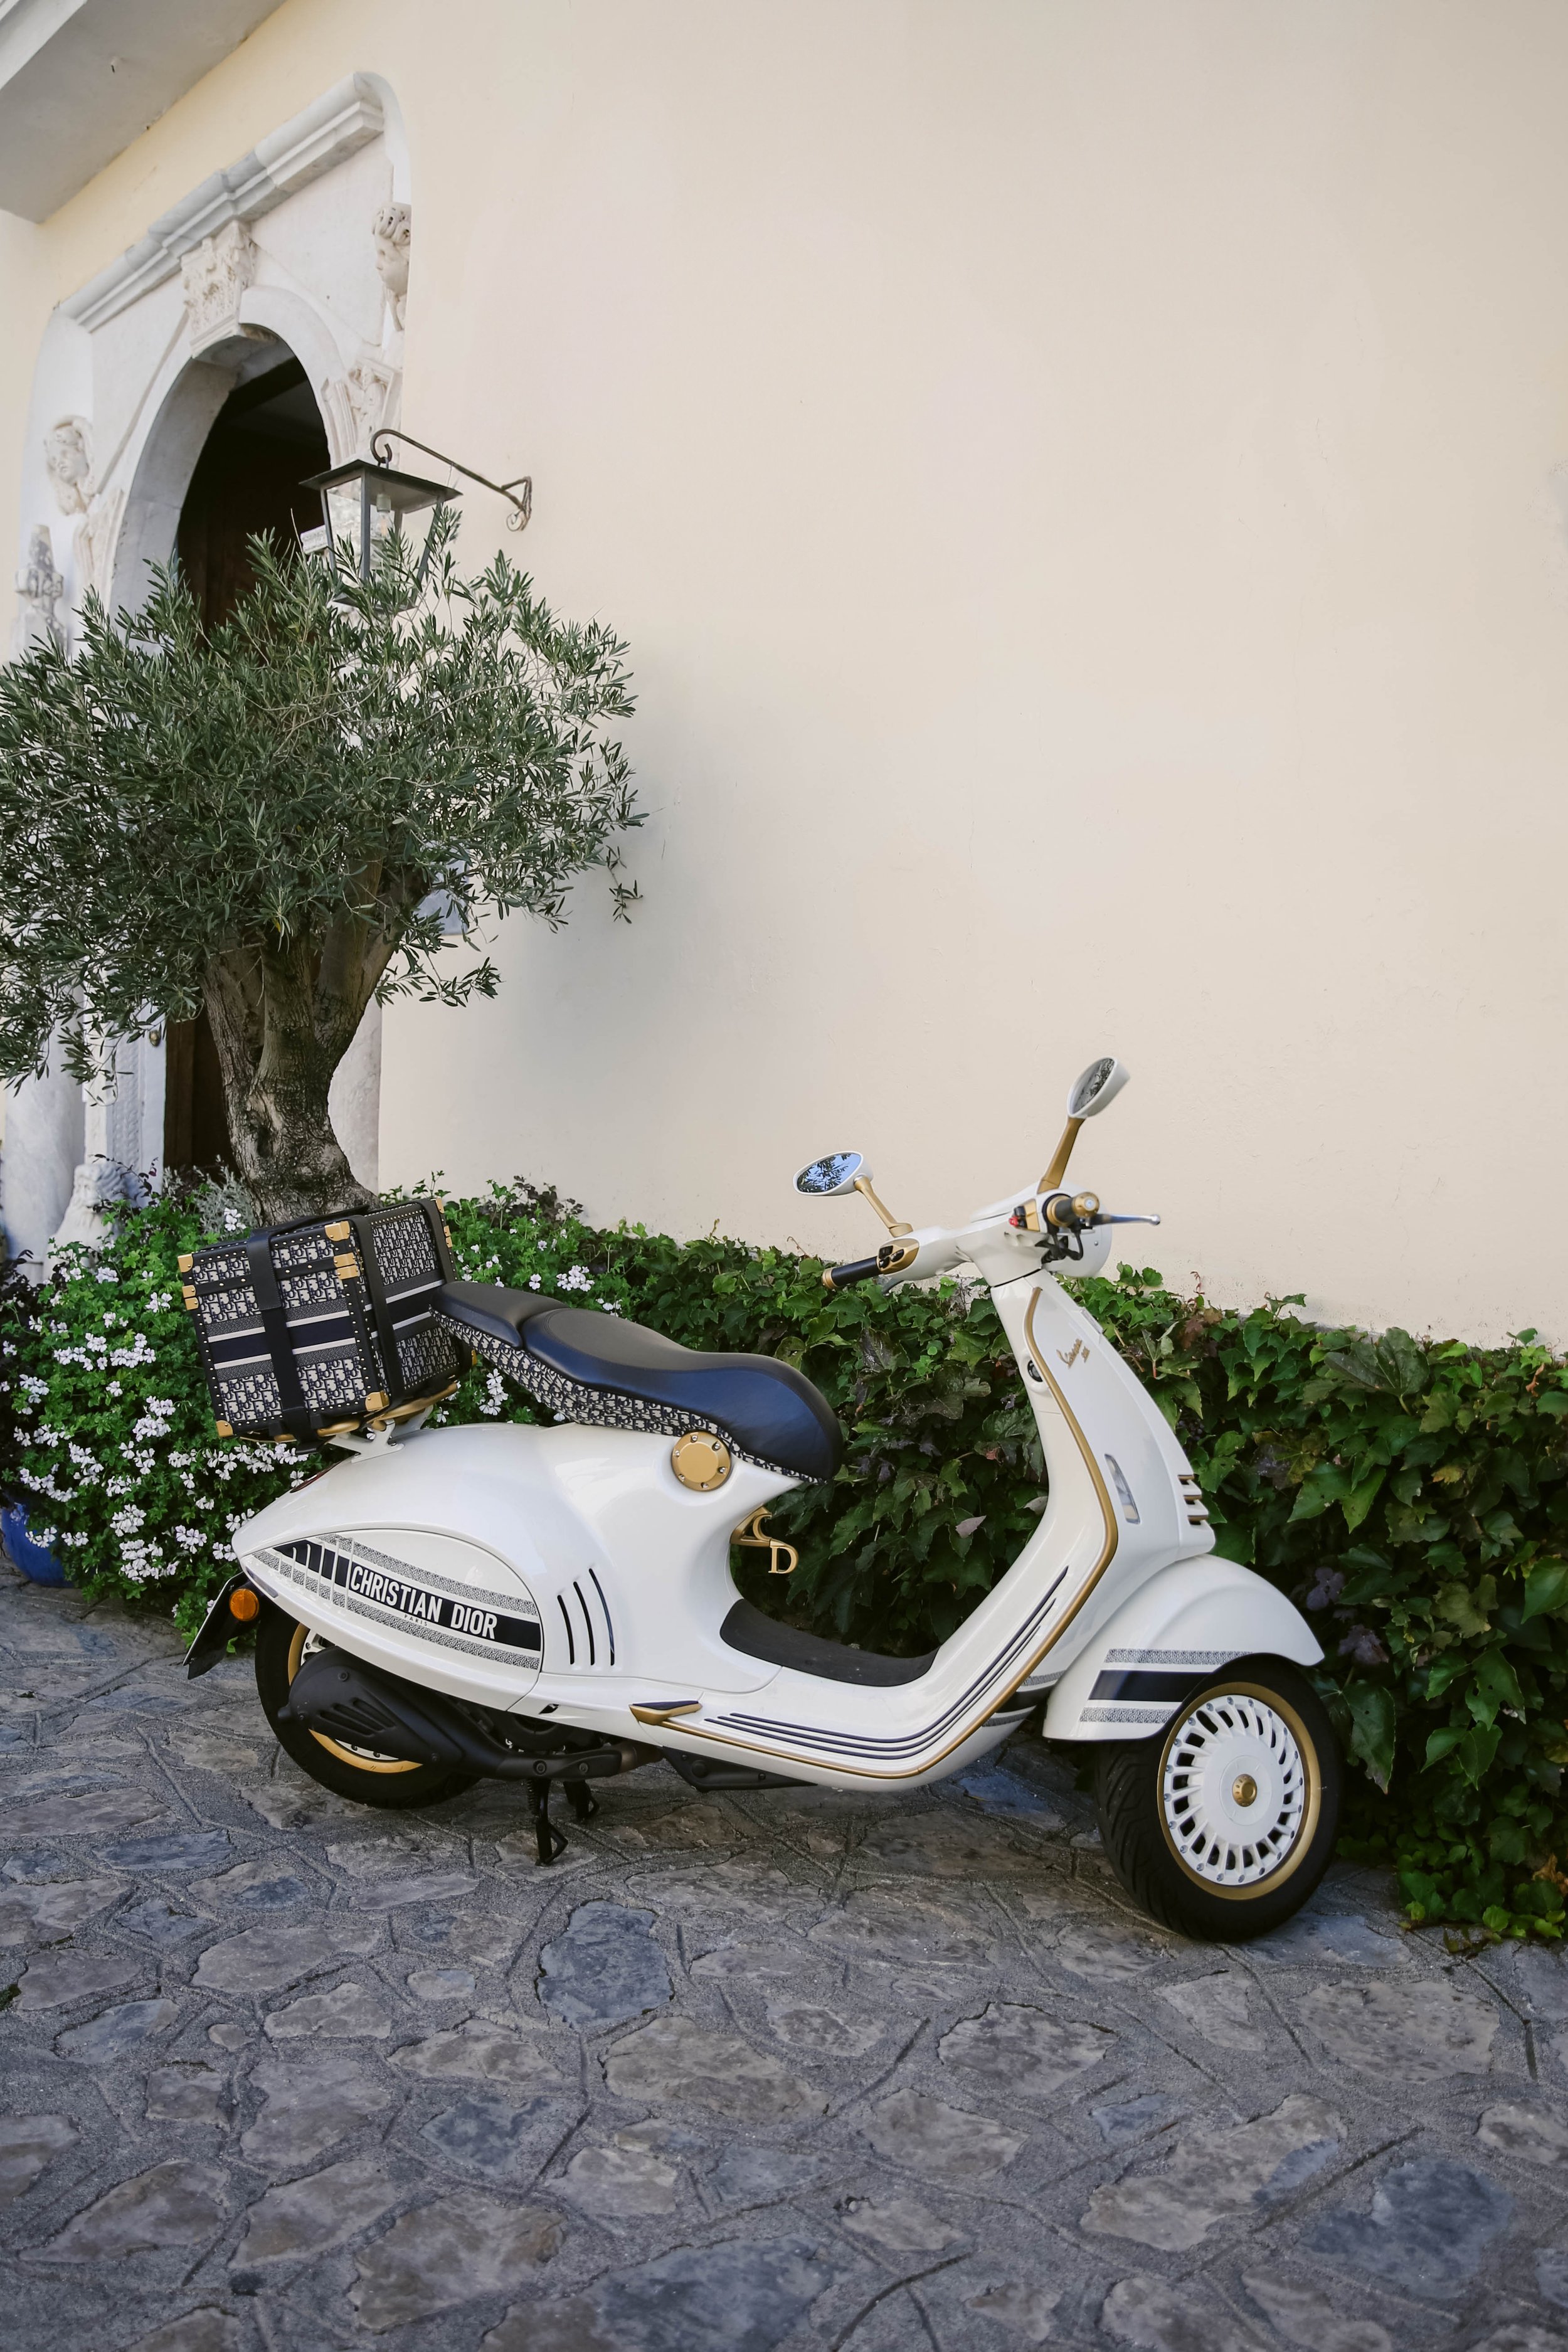 Christian Dior Scooter.jpg